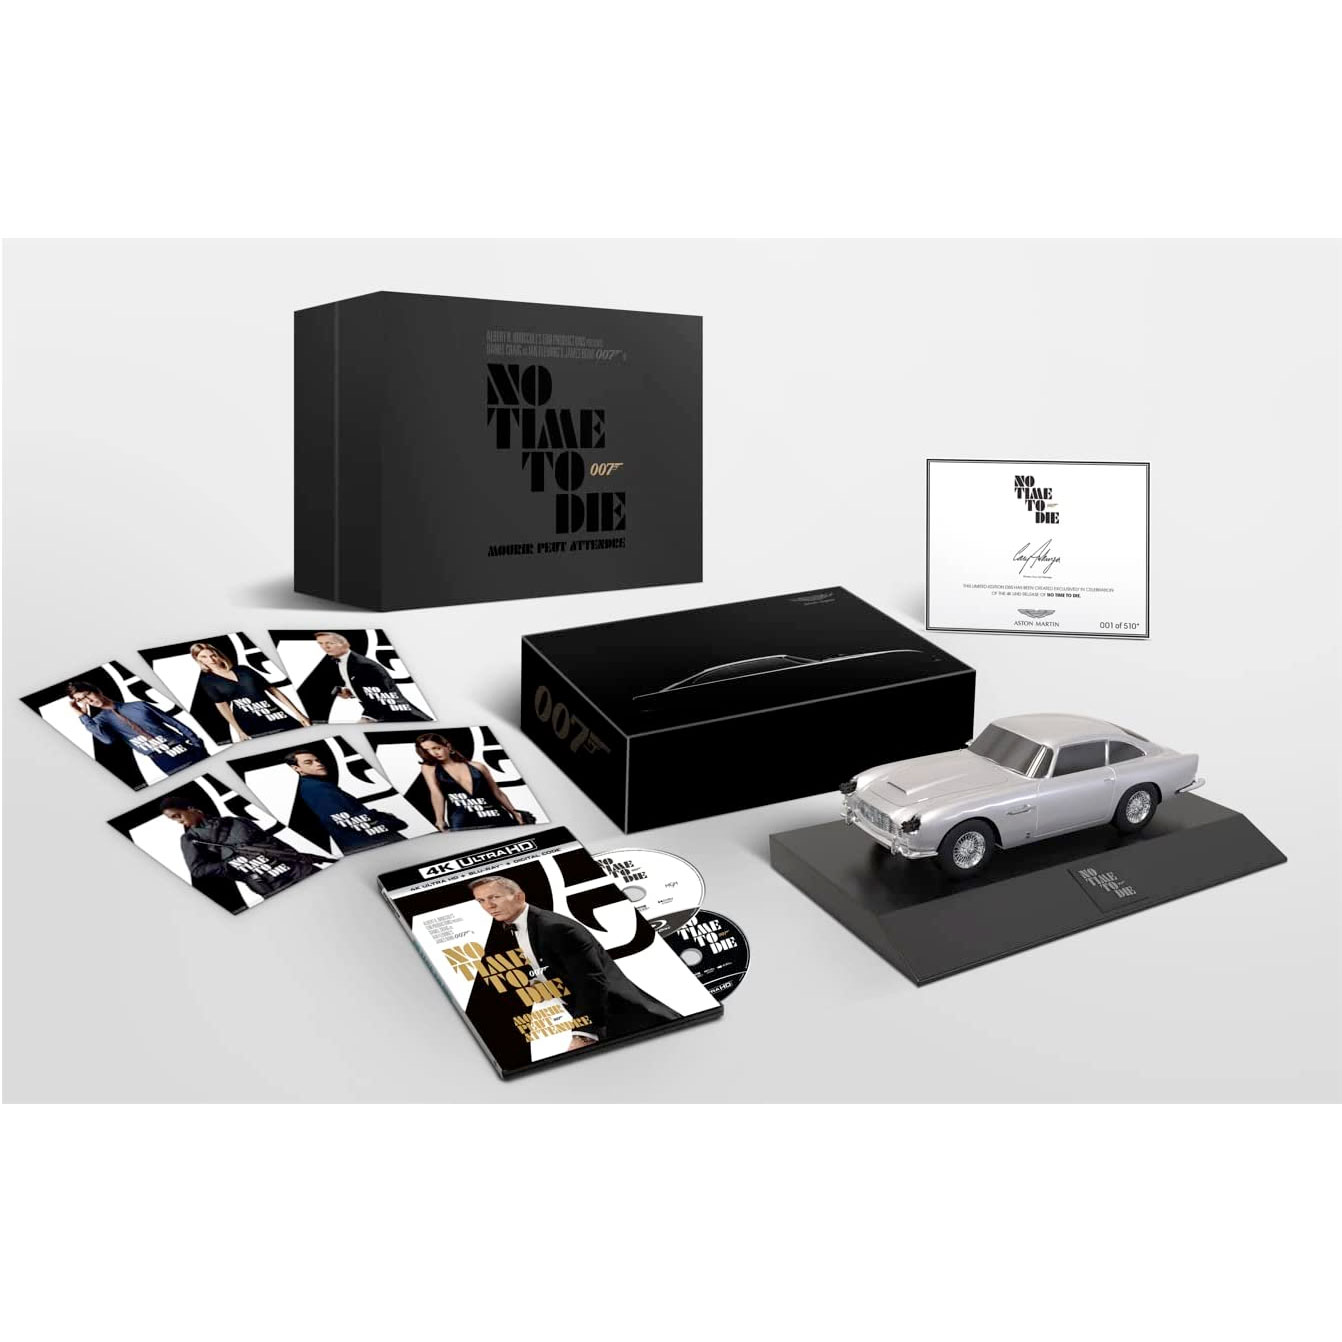 Amazon：No Time to Die Limited Edition 4K Ultra HD + Blu-ray Premium Gift Set 只賣$149.99